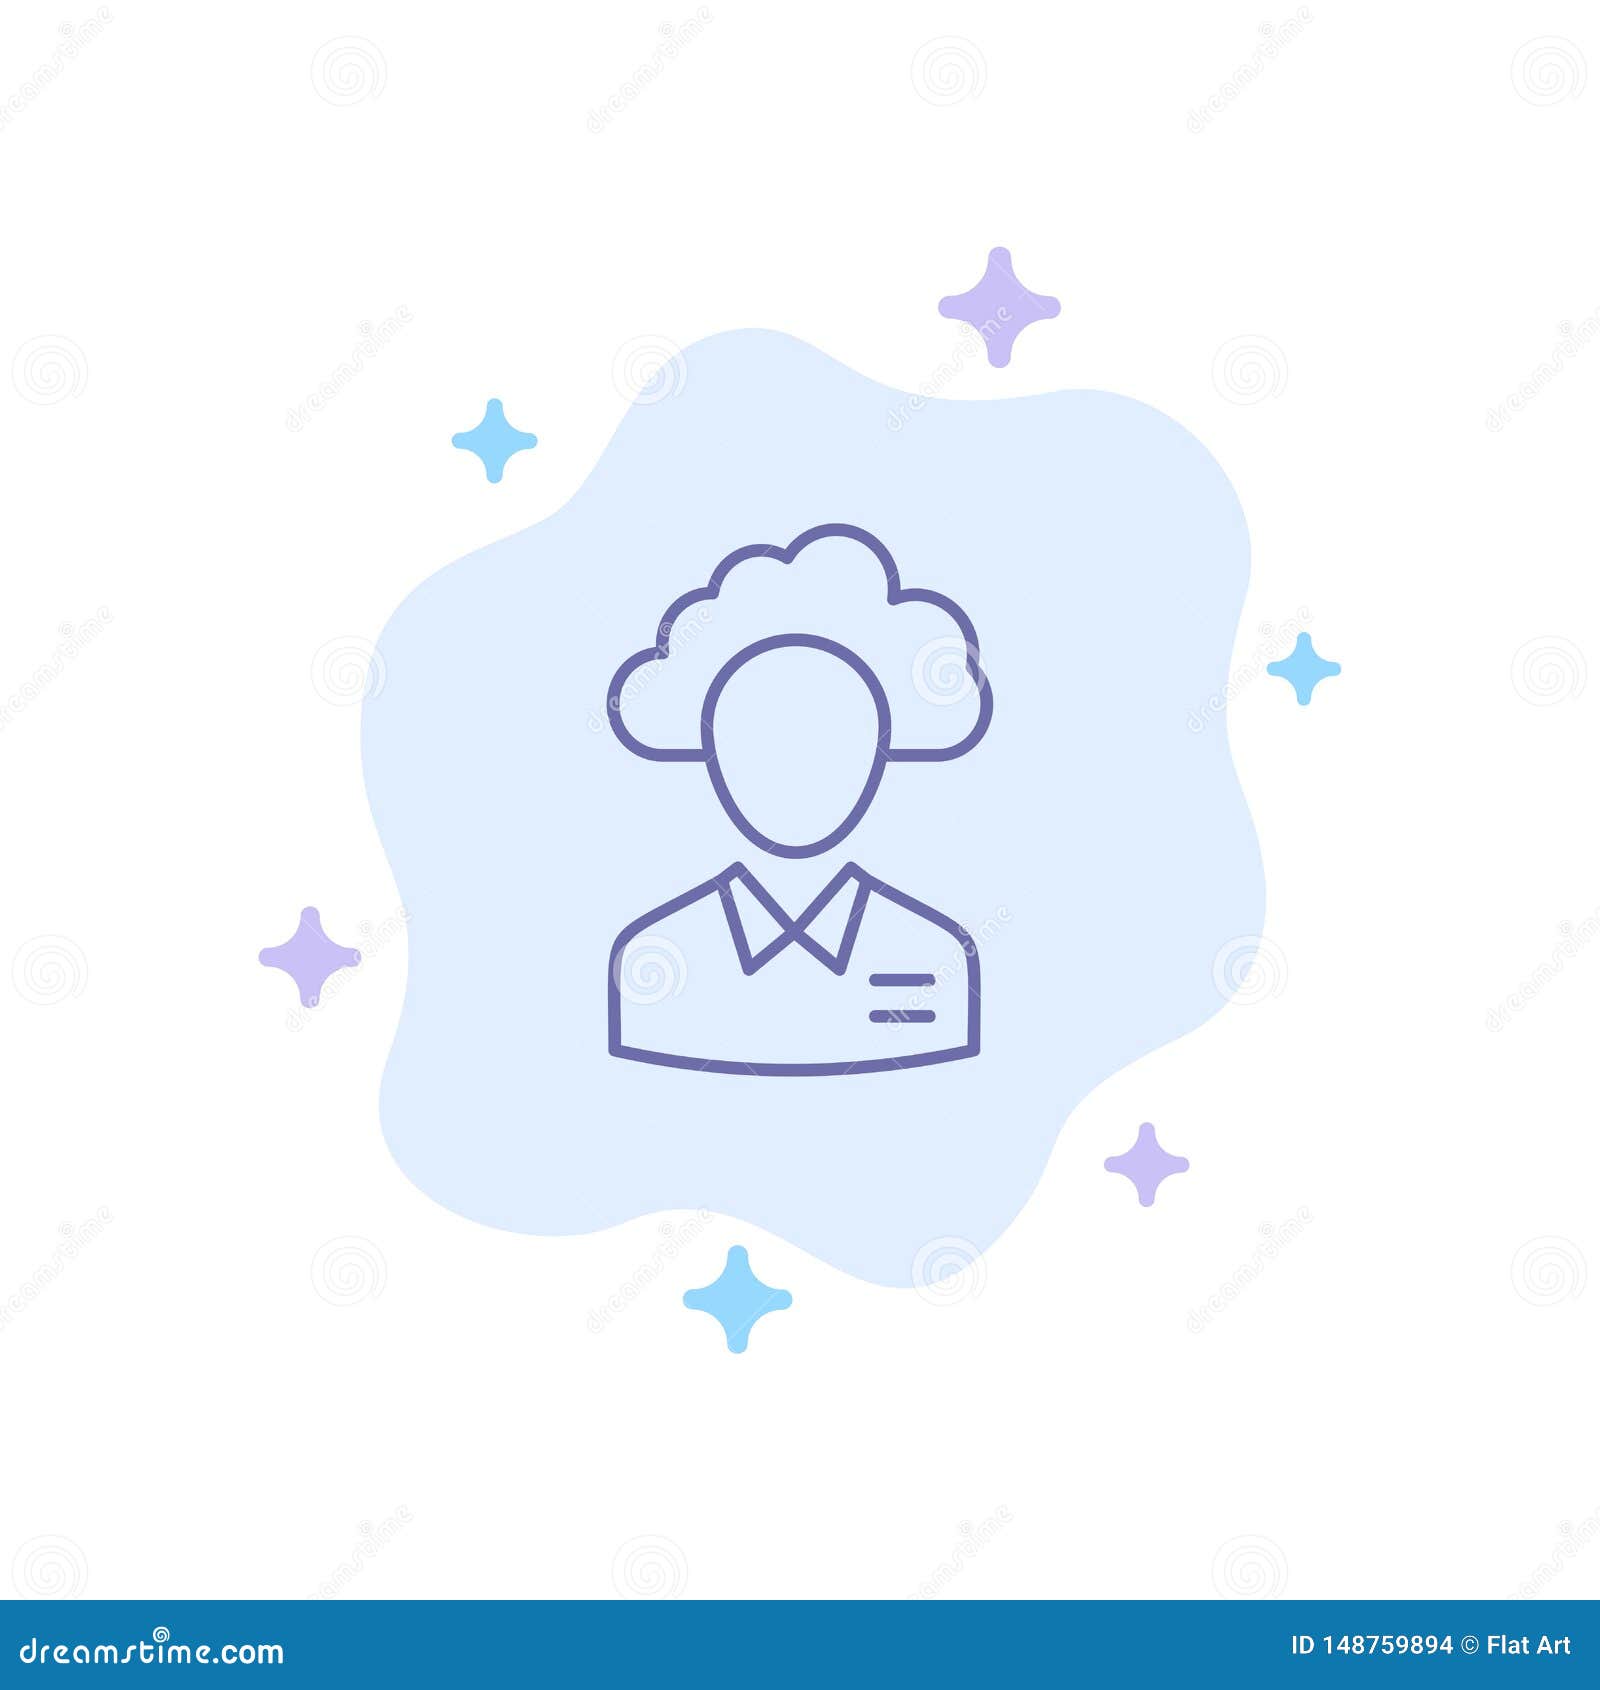 outsource, cloud, human, management, manager, people, resource blue icon on abstract cloud background